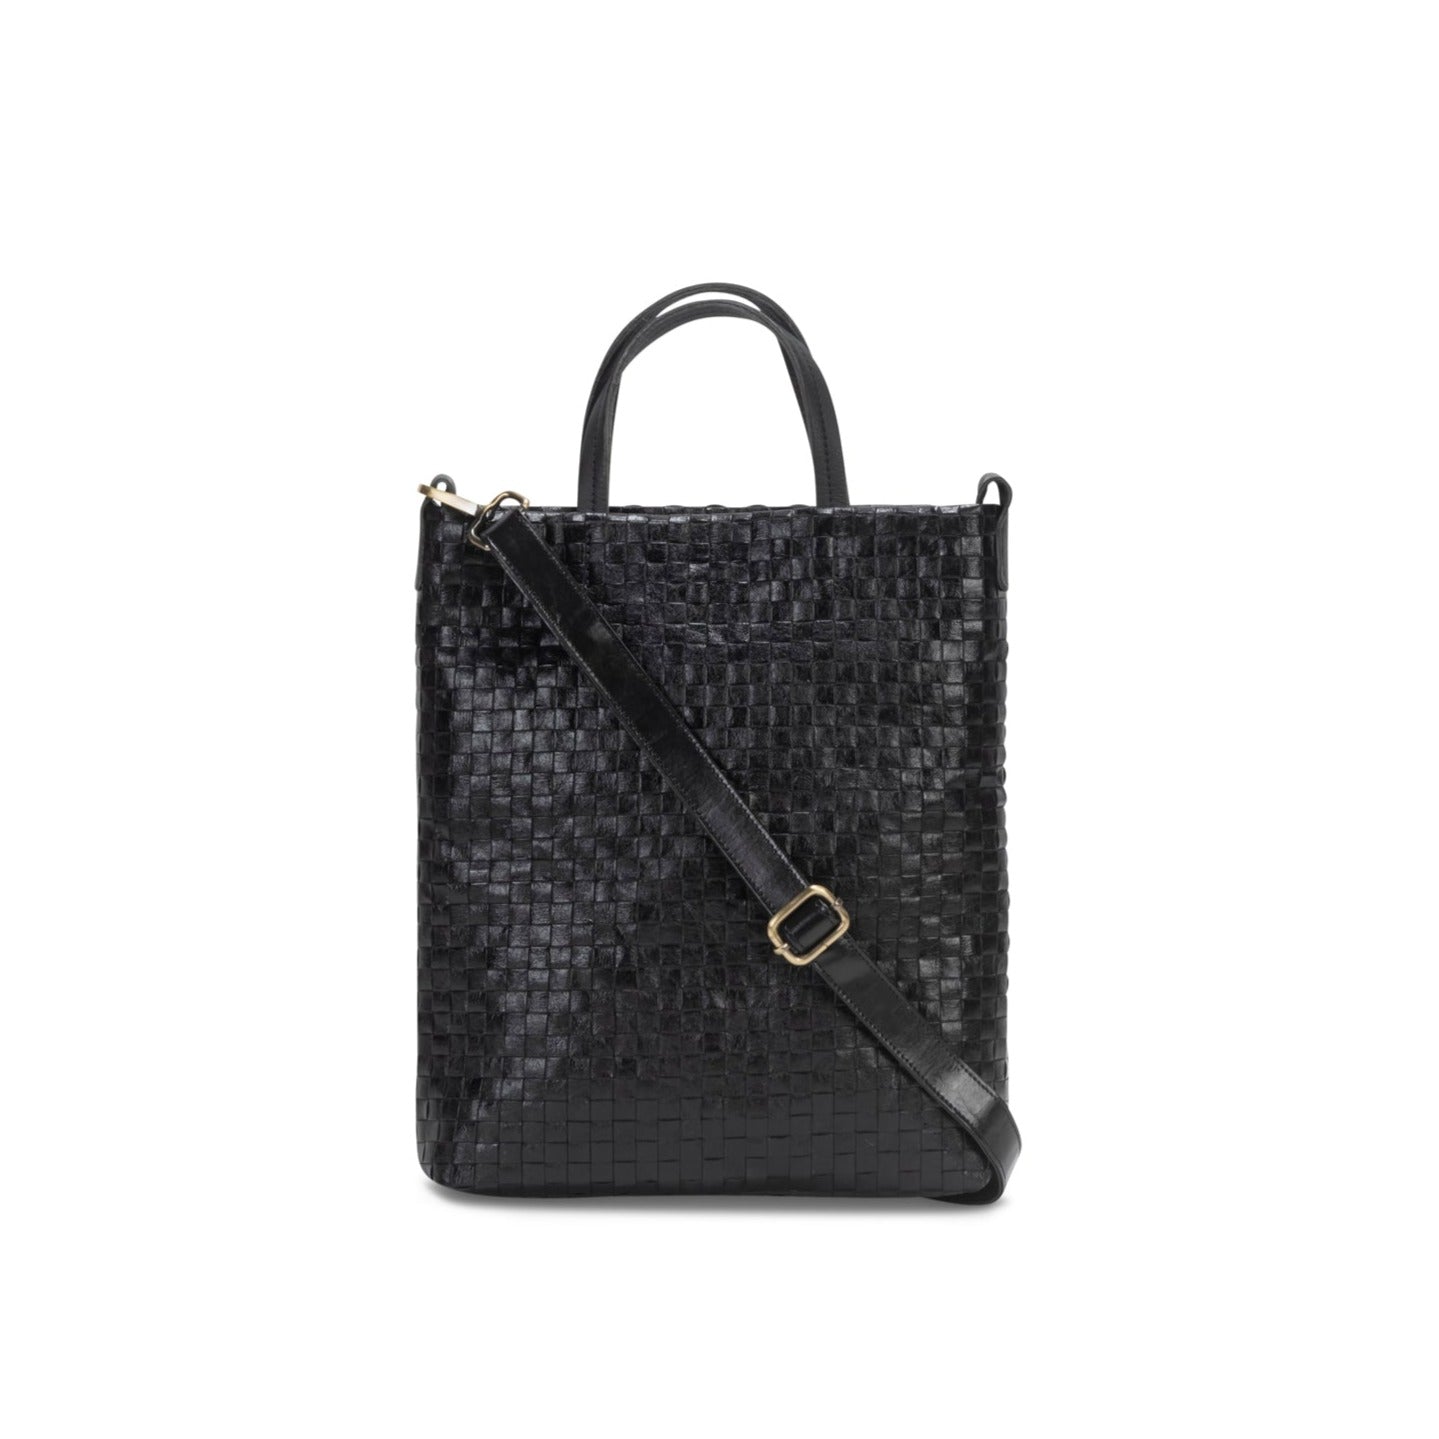 A woven washable paper tote bag is shown from the front angle. It features two top handles and a long adjustable shoulder strap. It is black in colour.